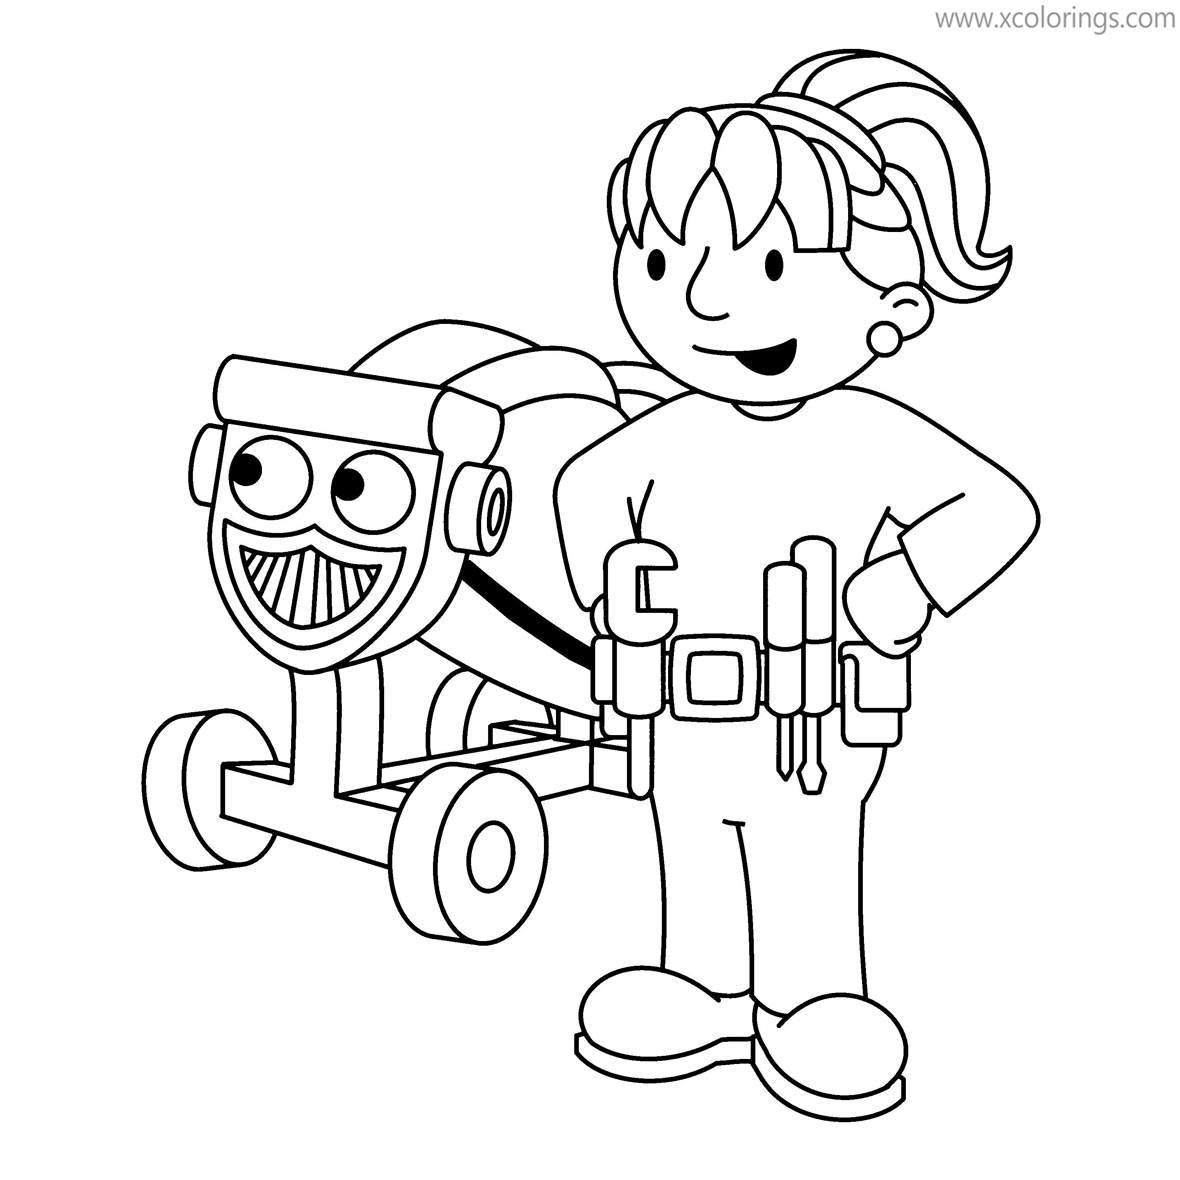 Free Bob The Builder Coloring Pages Wendy and Dizzy printable